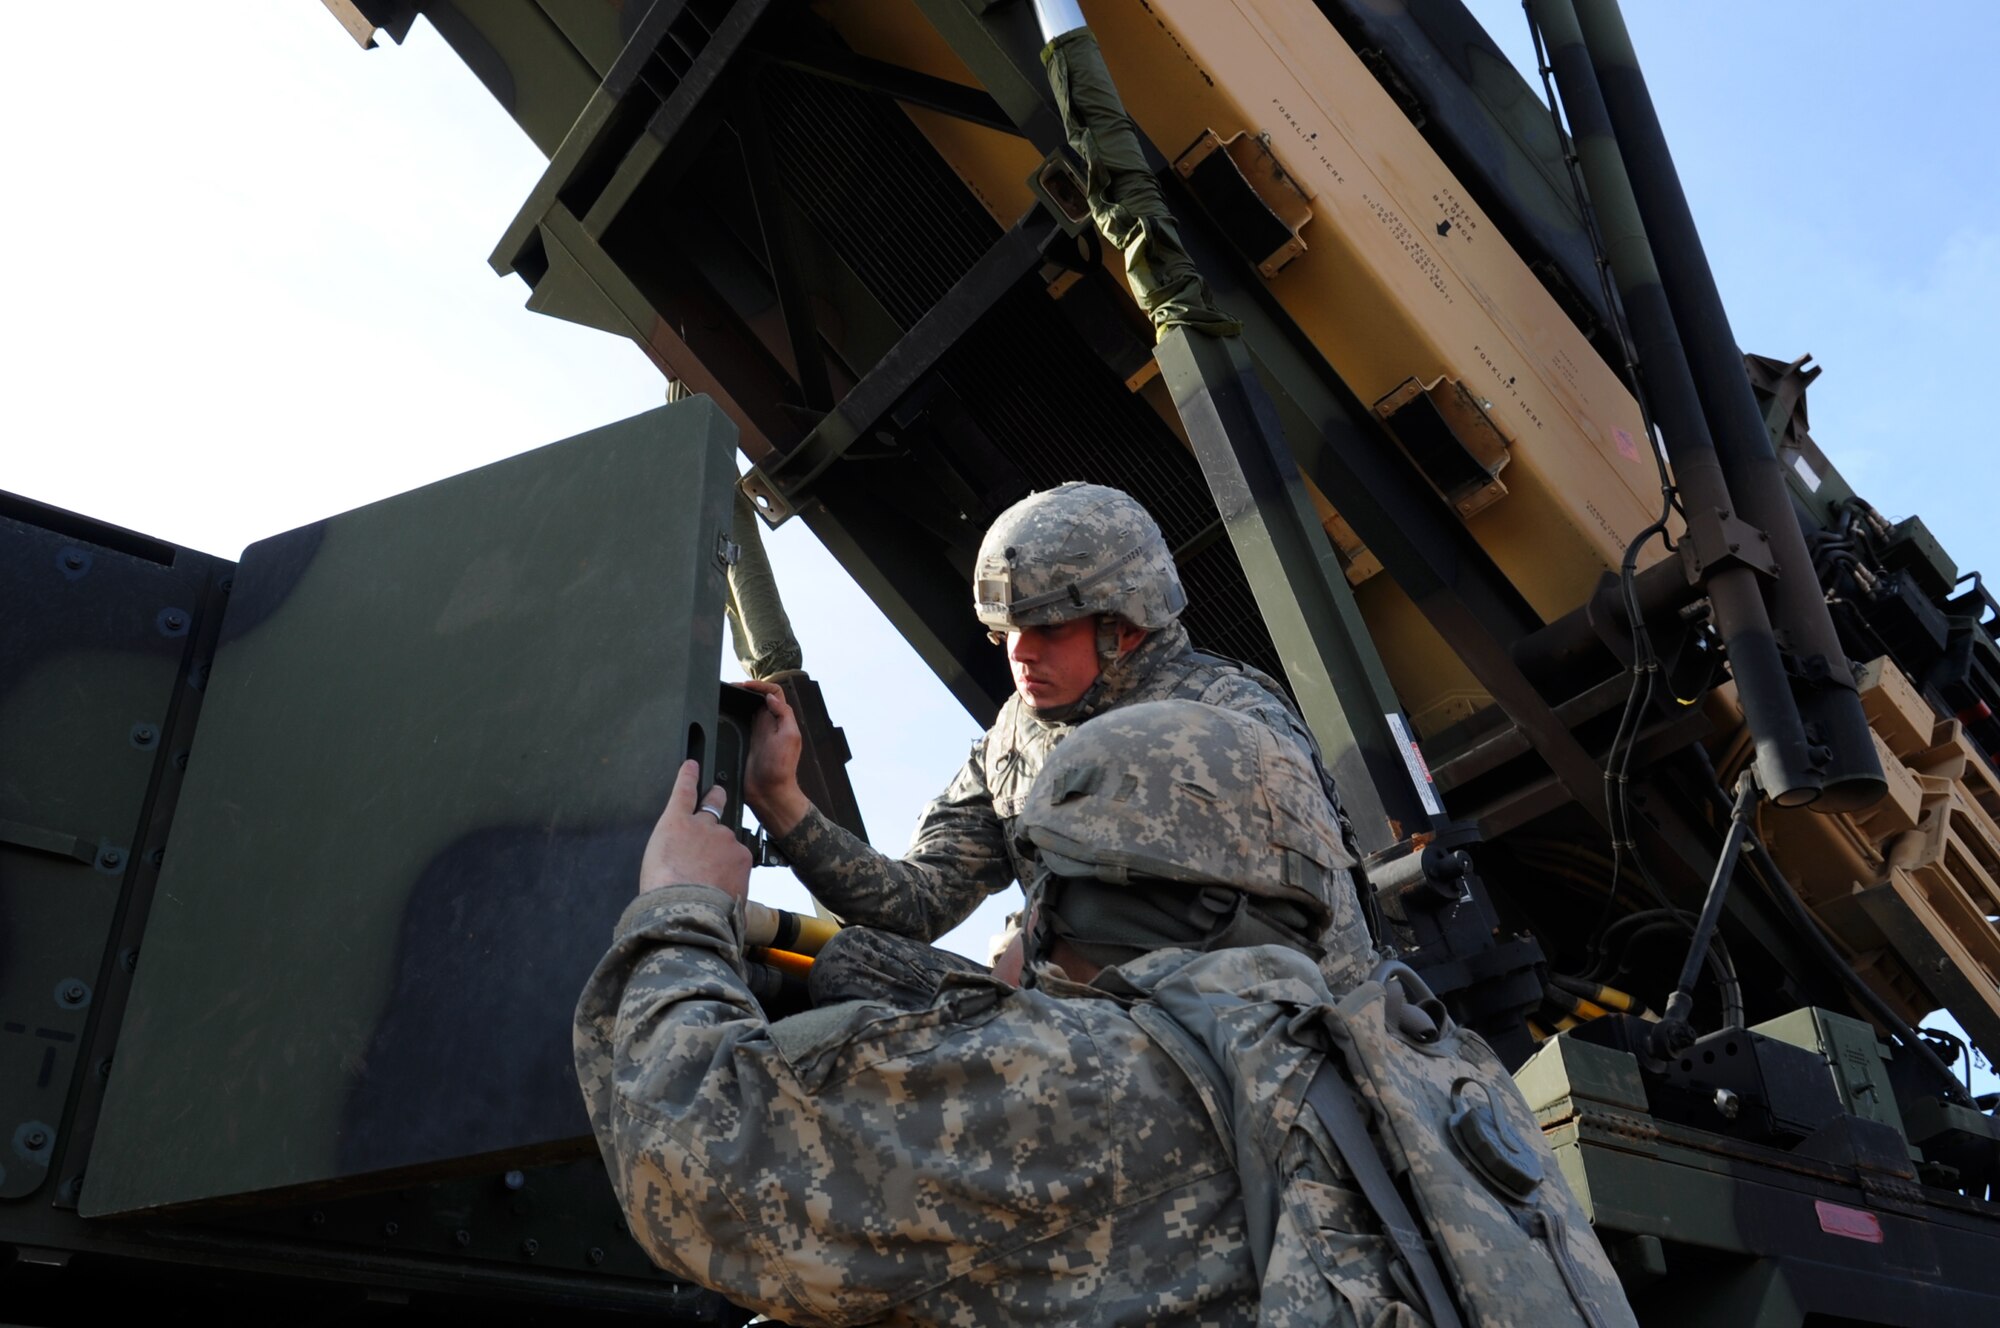 U.S. Army Spc. Charles Chesbro and U.S. Army Sgt. Zachary Perez, both 3rd Battalion, 2nd Air Defense Artillery maintainers, inspect the settings on a Patriot launching station Feb. 28, 2013, near Gaziantep, Turkey. U.S. Army Patriots from Fort Sill, Okla. are deployed to Turkey as part of a precautionary defensive measure undertaken in accordance with NATO’s standing defense plan. (U.S. Air Force photo by Senior Airman Daniel Phelps/Released)